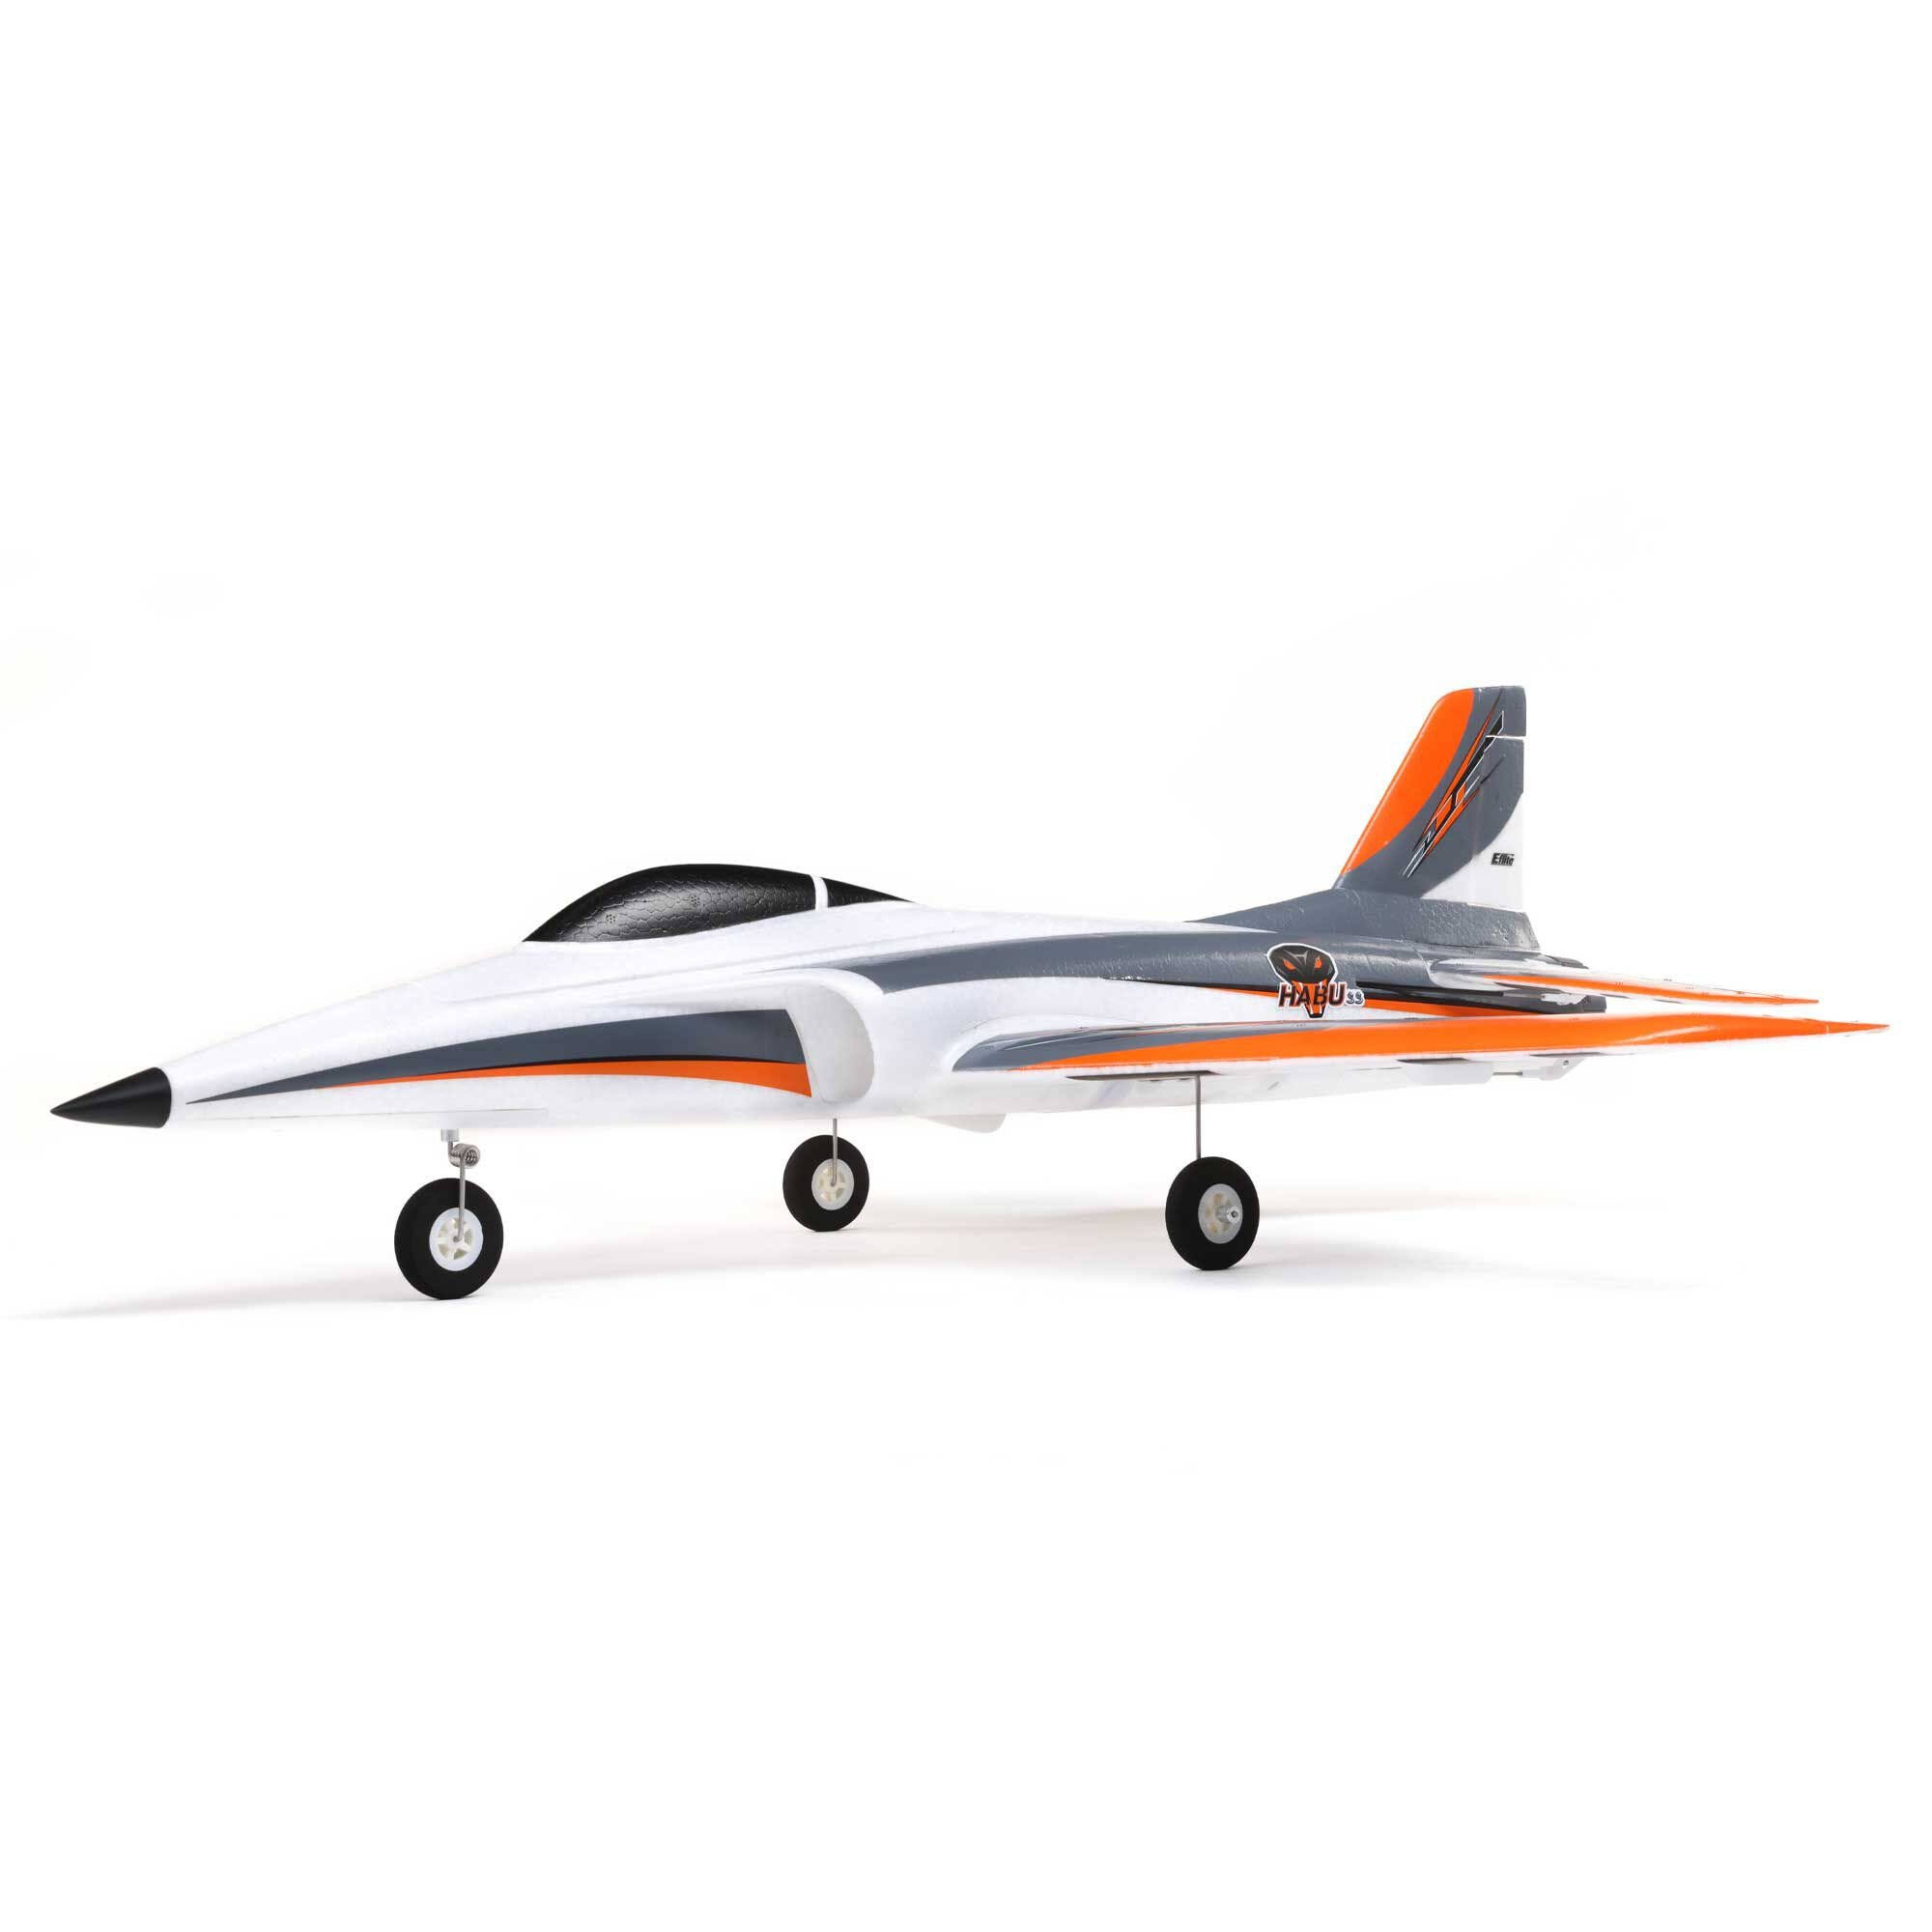 E-flite Habu SS (Super Sport) 50mm EDF Jet BNF Basic with Safe Select and AS3X (EFL02350)